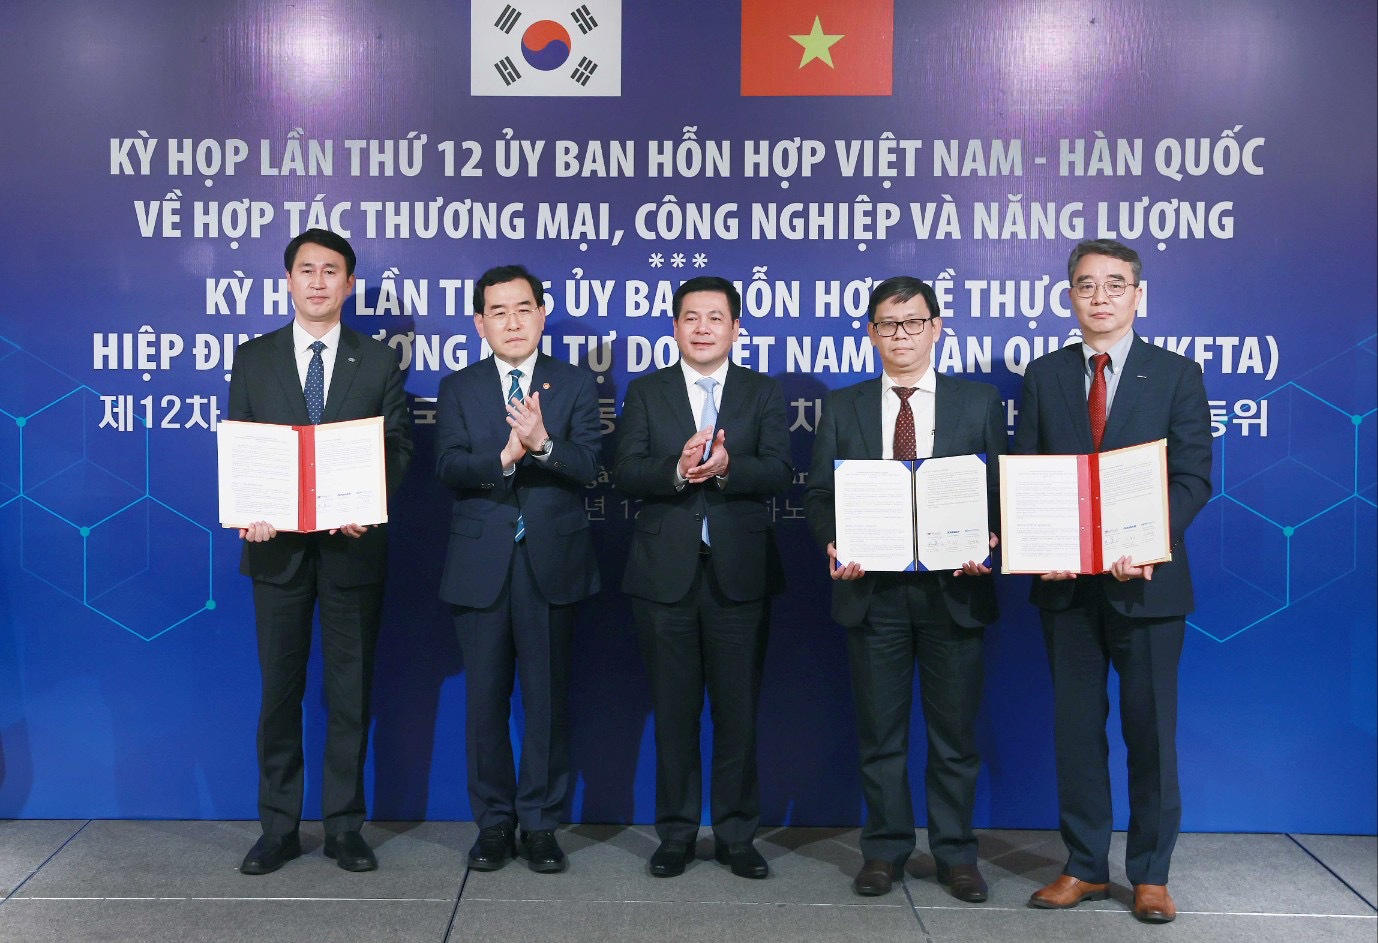 On Dec. 22, Officials pose for a photo at the MoU signing ceremony held in Hanoi for cooperation on clean energy. From left: Kyubok Lee, Vice President of KETI, Chang-yang Lee, Minister of Trade, Industry and Energy, Nguyen Hong Dien, Minister of Industry and Trade of Vietnam, Tran Ky Phuc, Director General of Vietnam’s IE, and Hongook Park, CEO of Doosan Enerbility’s Power Services BG.